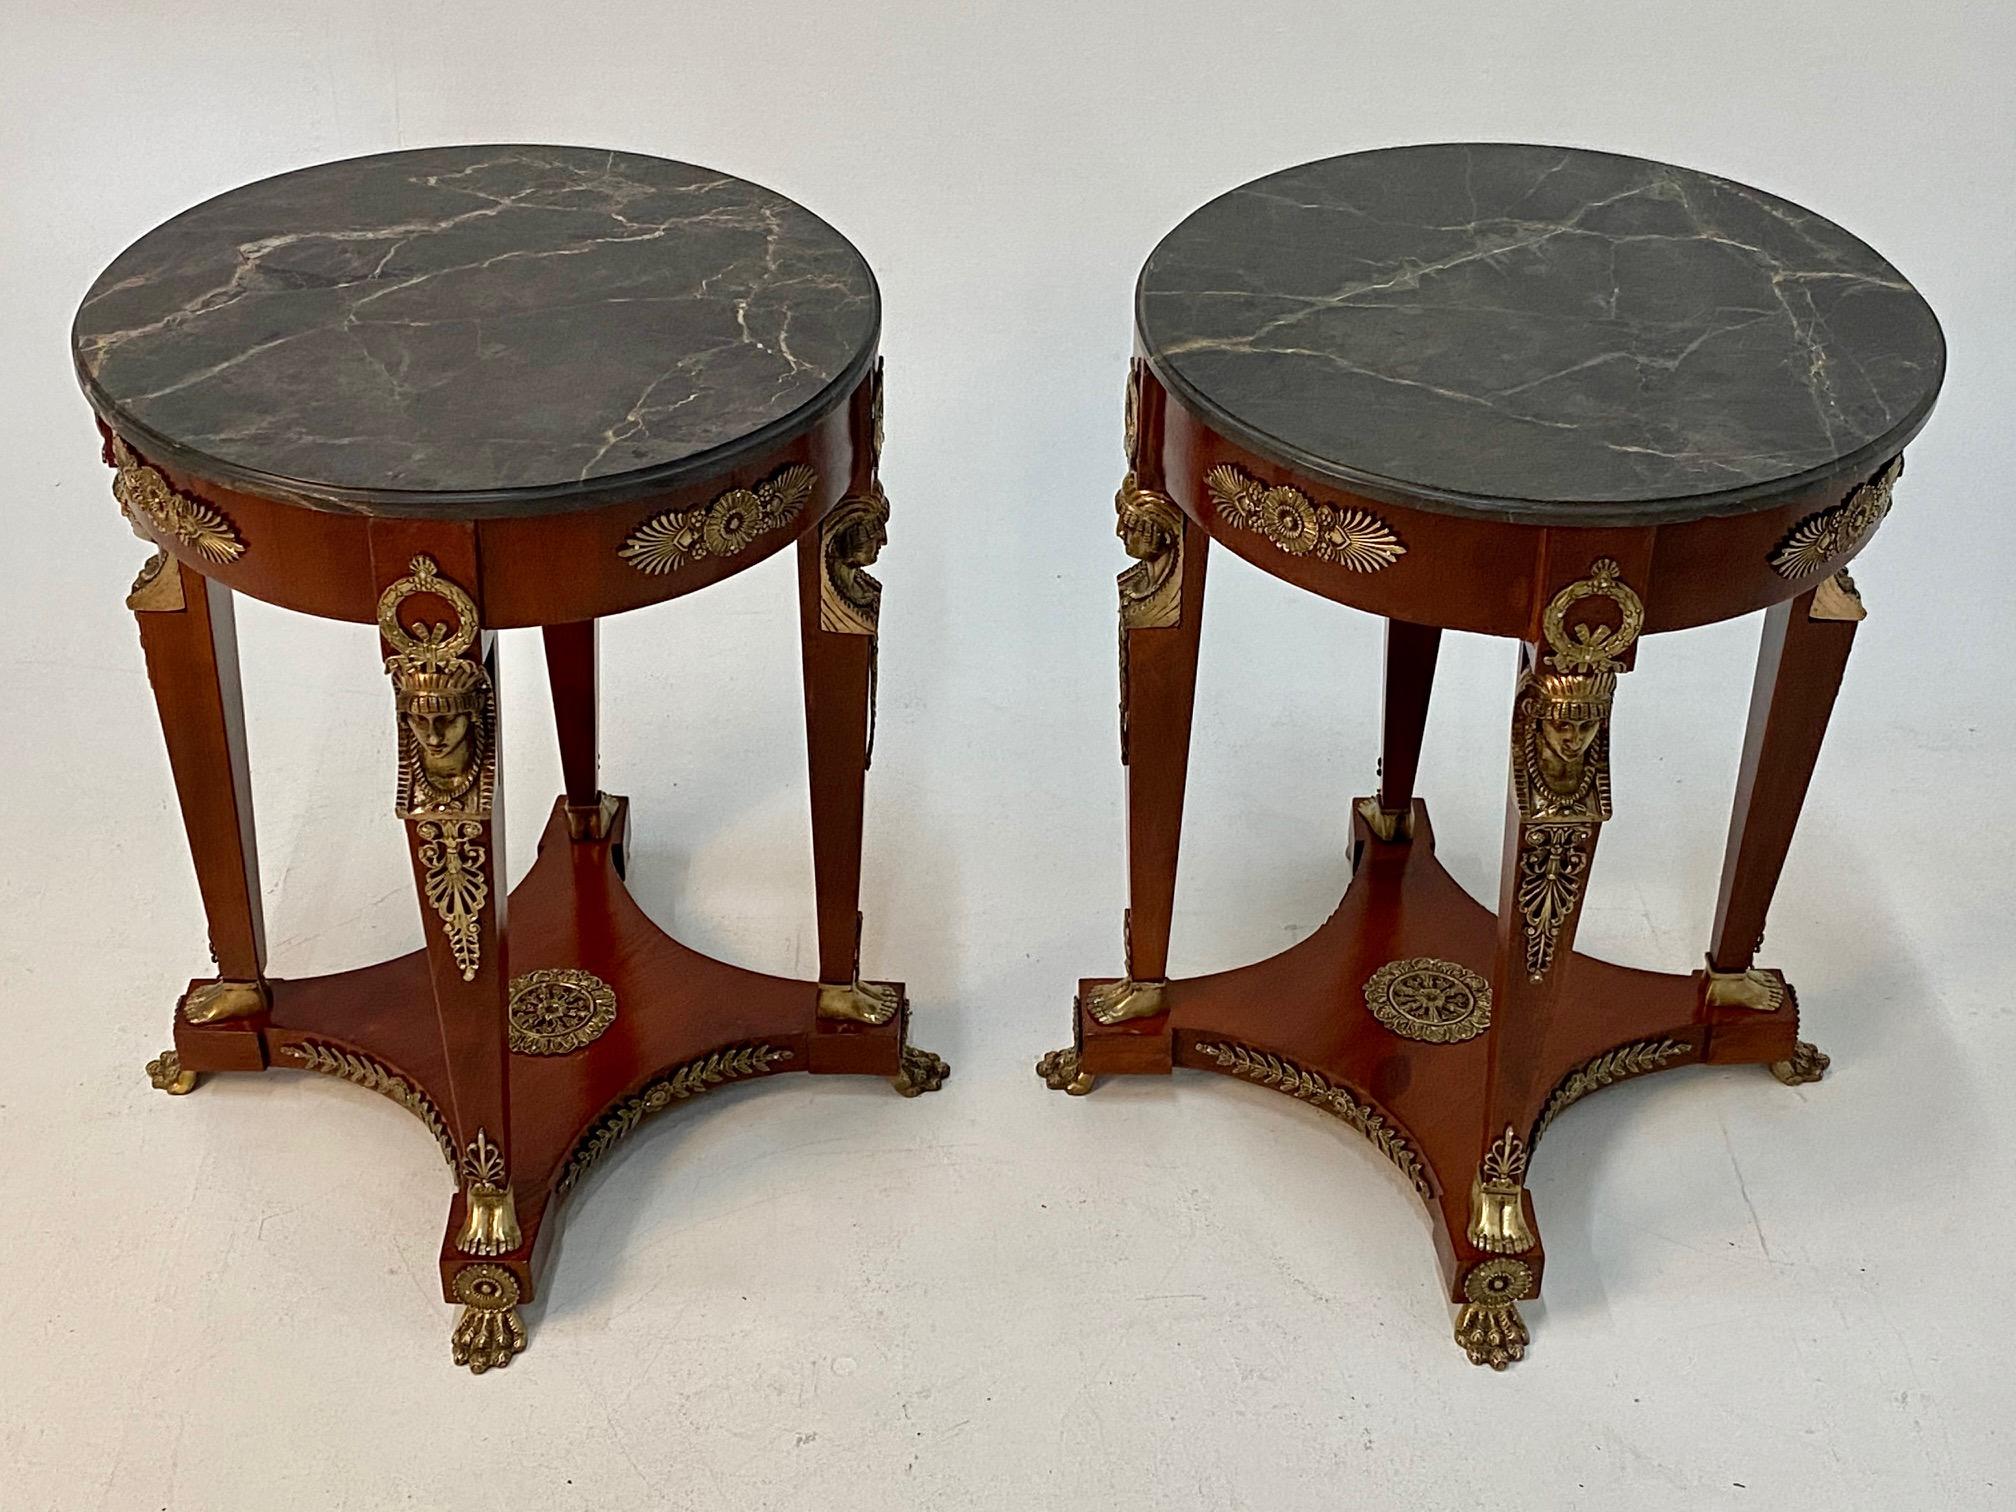 Elegant and ornate pair of round French Empire style end tables having rich mahogany bases with 4 legs and fancy bronze figural decoration at the tops of the legs, wreaths, and animal paw feet on elevated bases. The black and grey veined marble tops